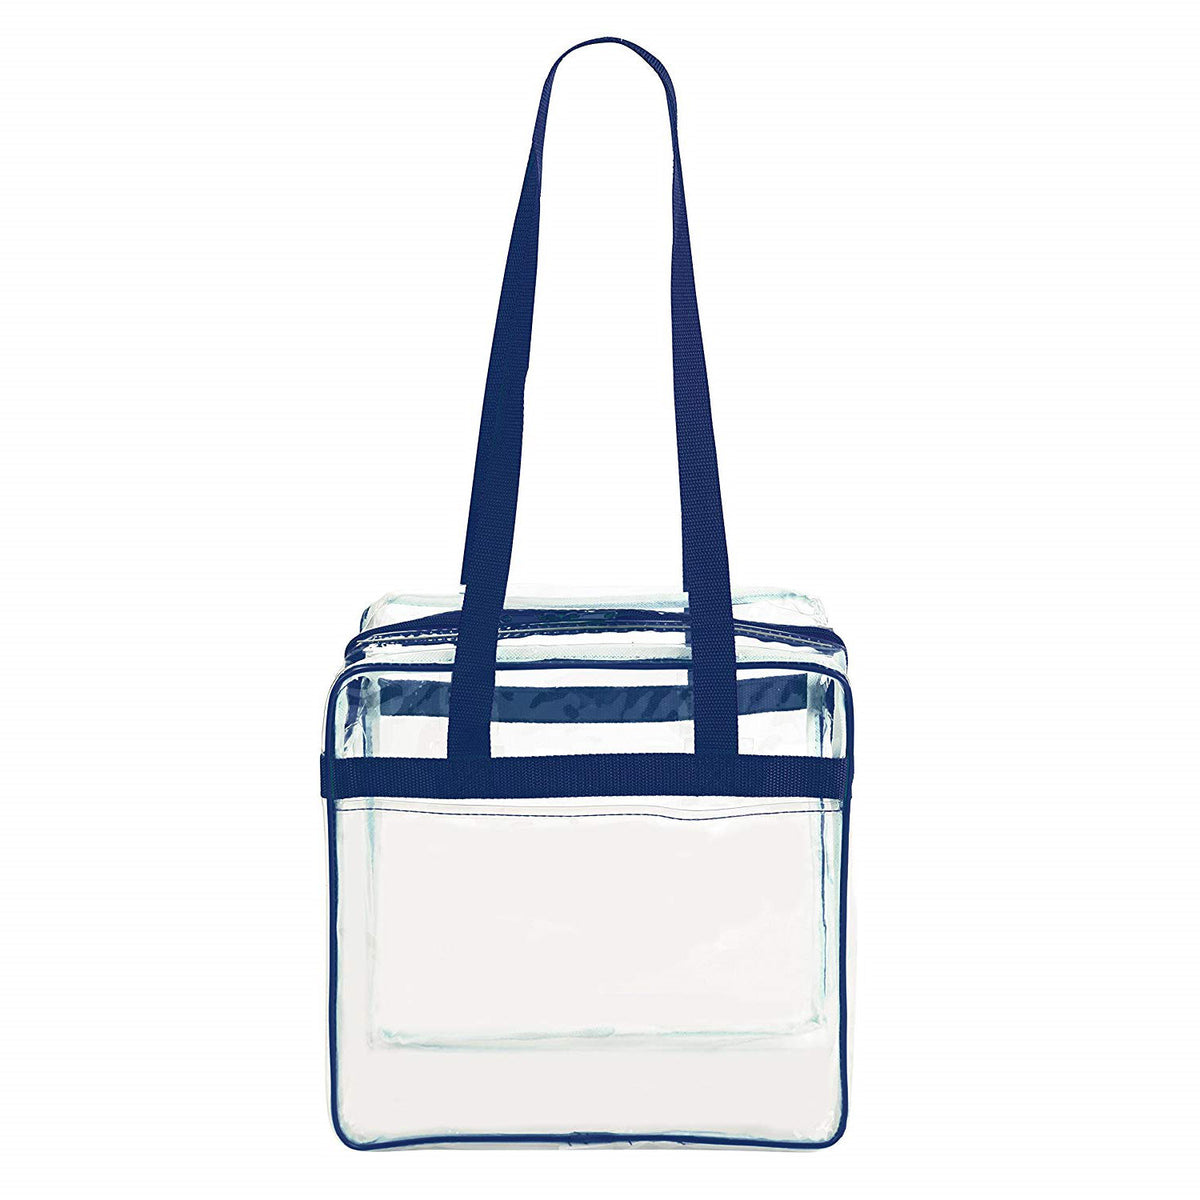 Stadium Approved Clear Tote Handbag with Handles, Large Plastic